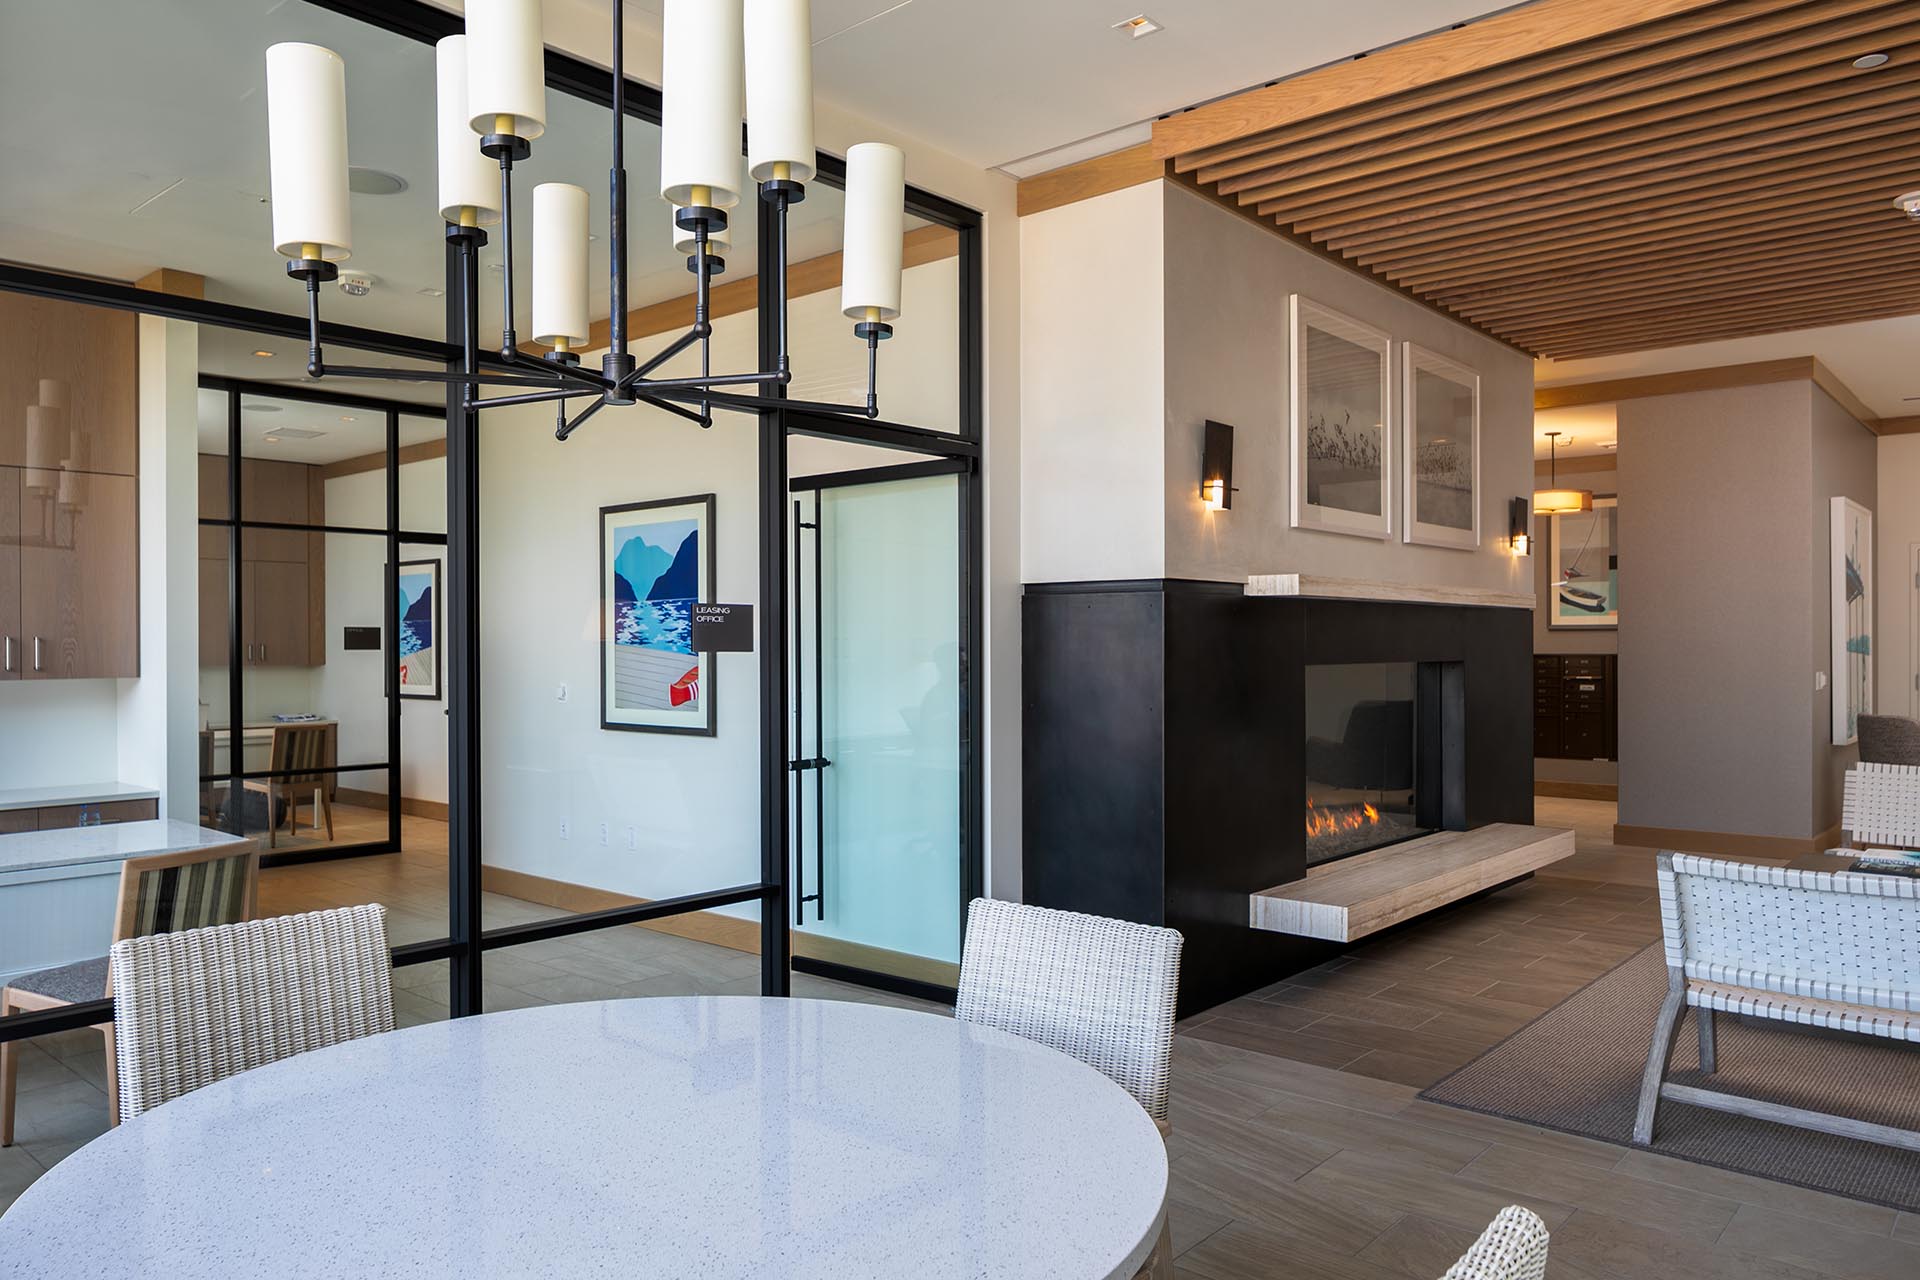 Several rooms, separated by glass walls and a large modern fireplace with a marble ledge